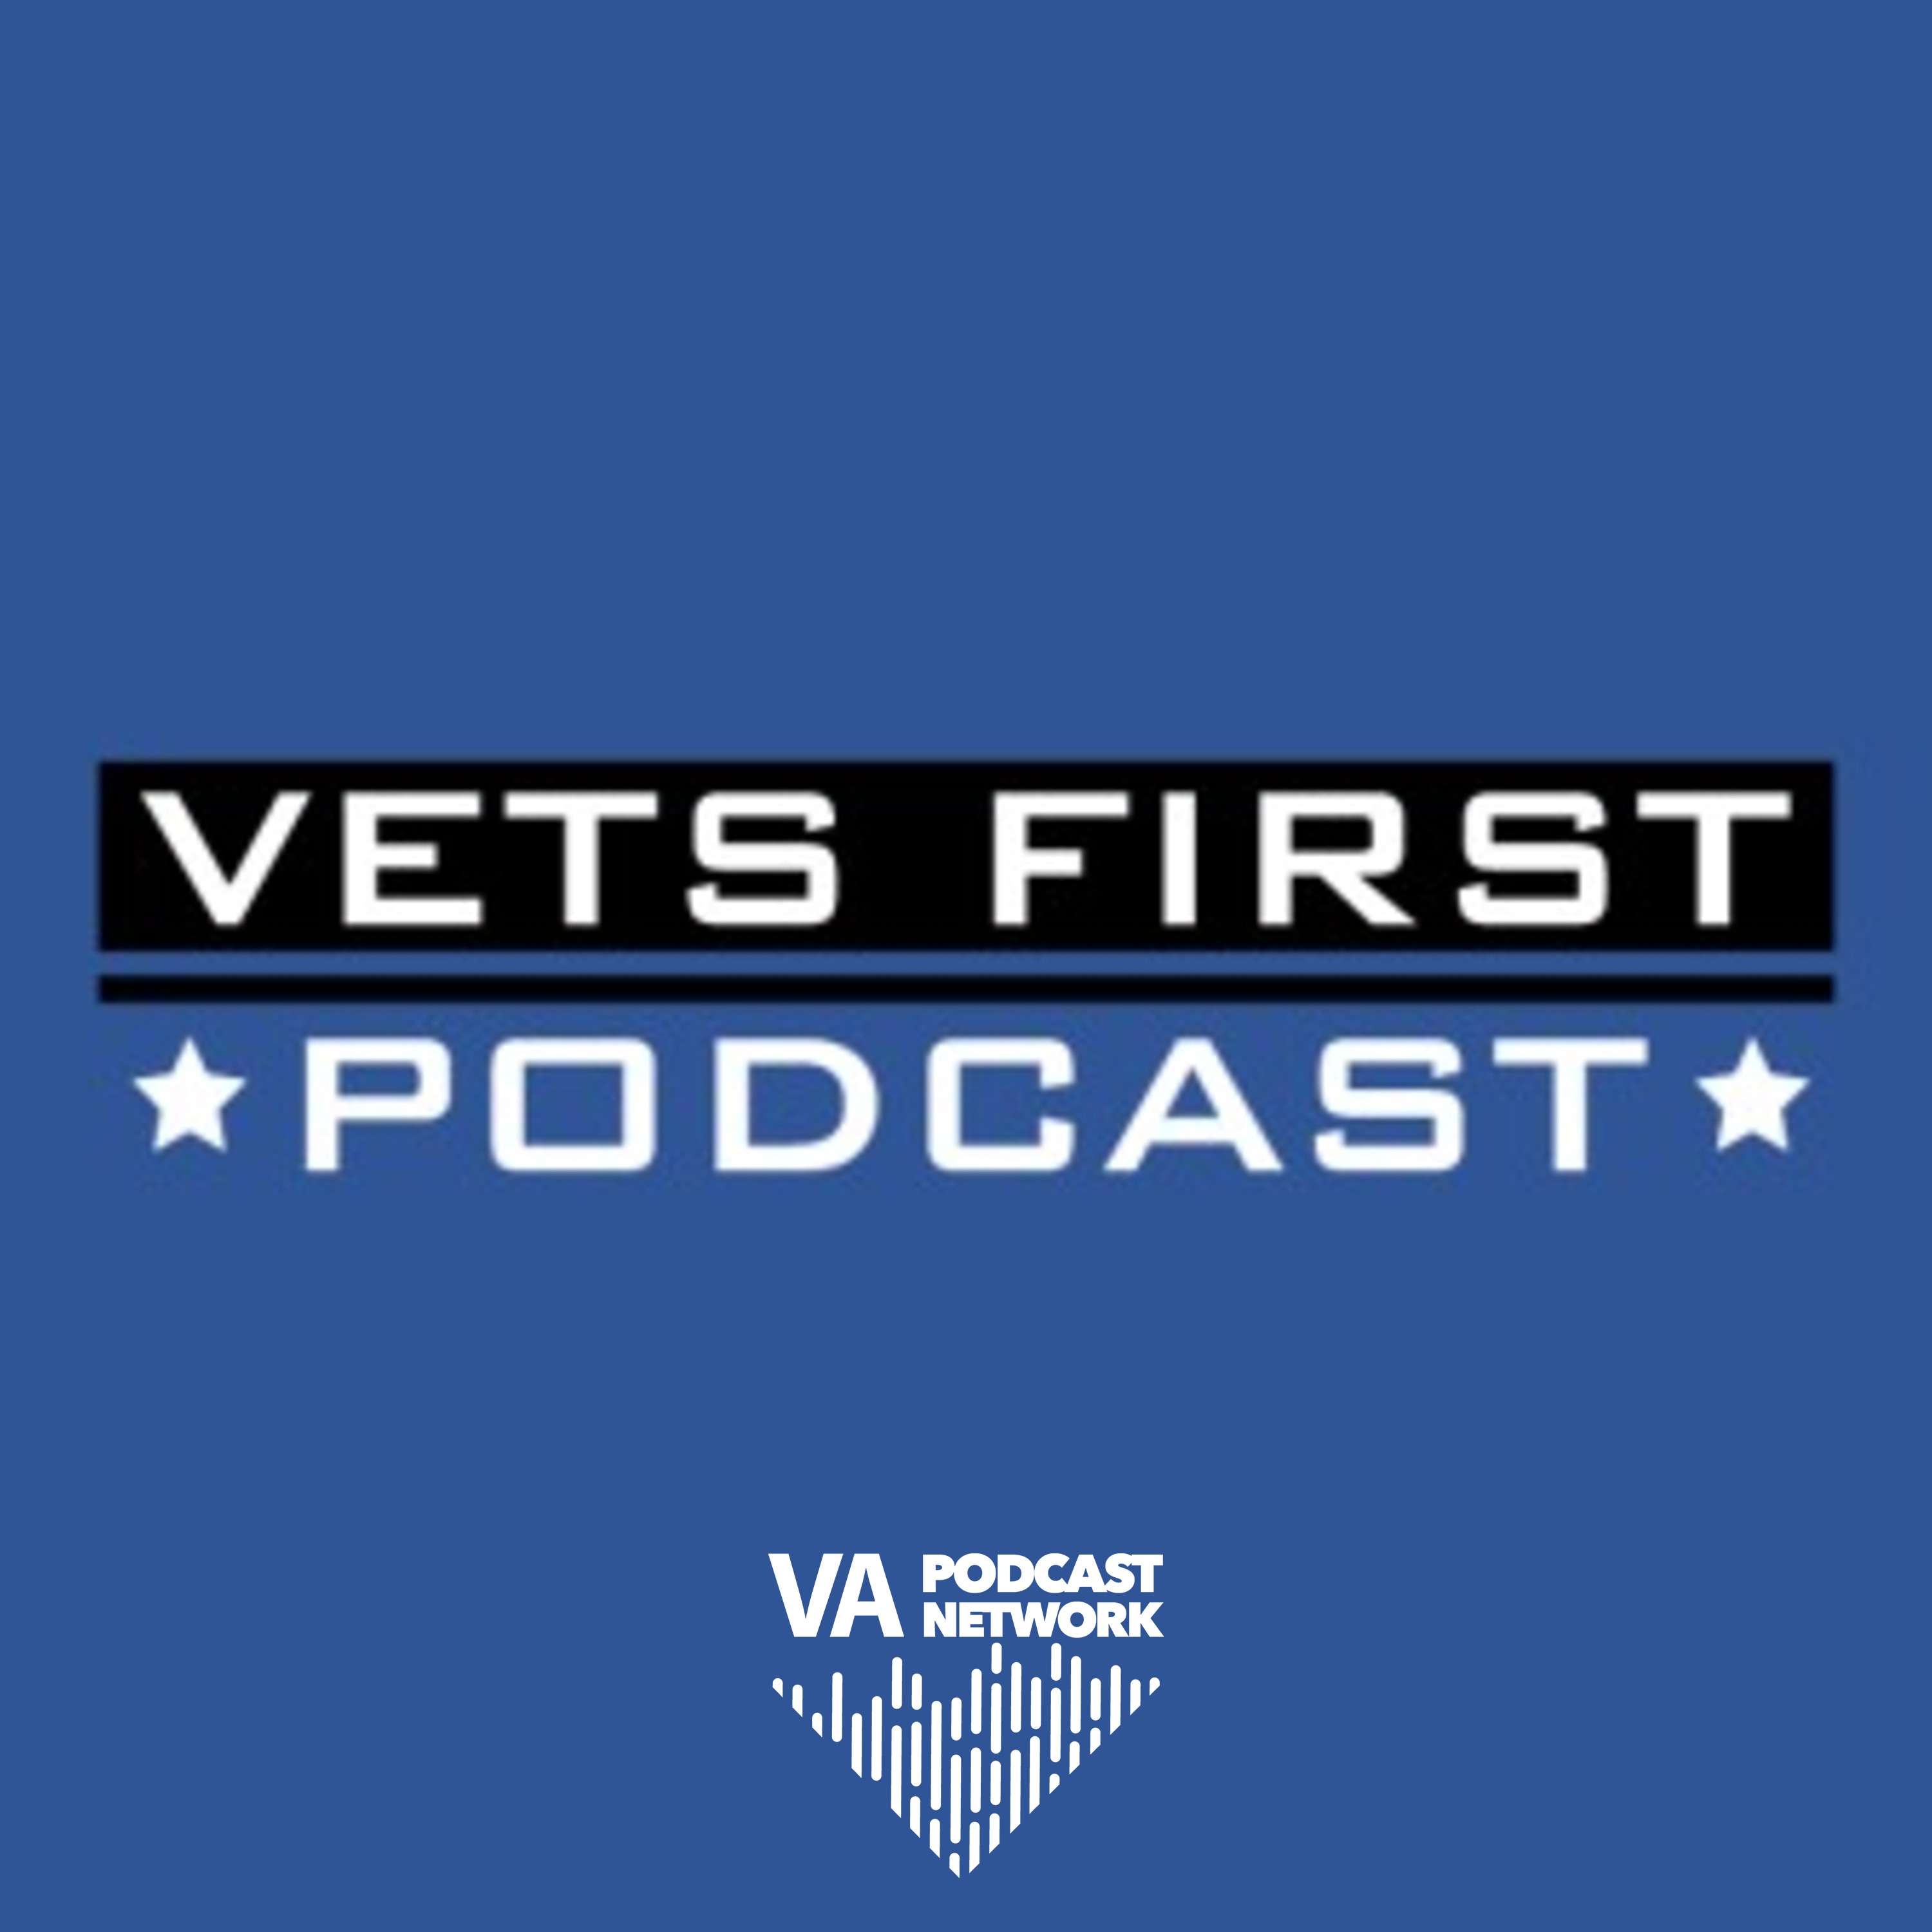 Season 3 Episode 11: Advocating for Veterans and families with sight loss: Dr. Thomas Zampieri and the Blinded Veterans Association